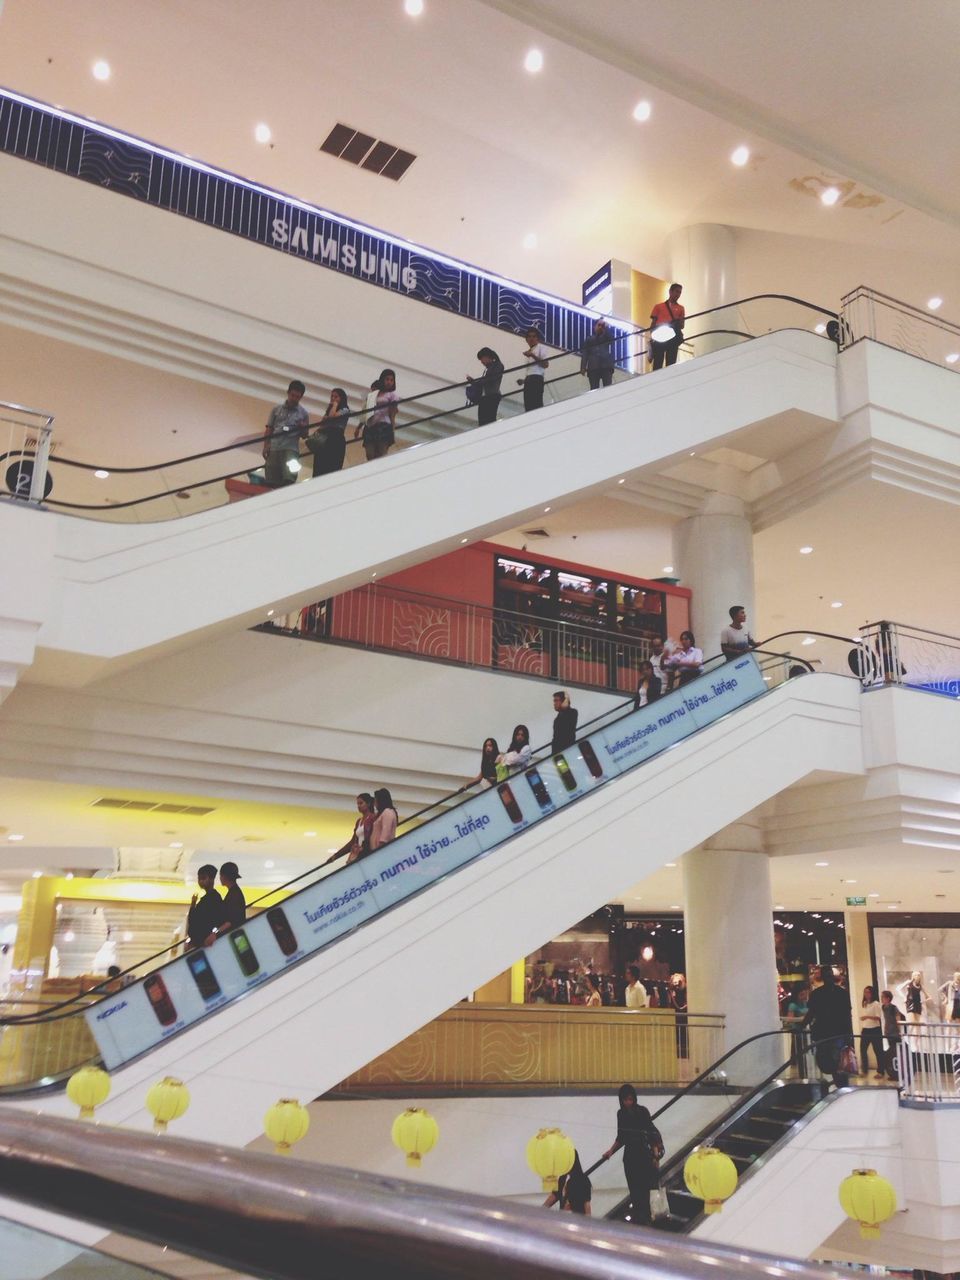 indoors, architecture, built structure, railing, steps and staircases, staircase, steps, ceiling, illuminated, men, low angle view, lifestyles, person, modern, high angle view, shopping mall, walking, incidental people, large group of people